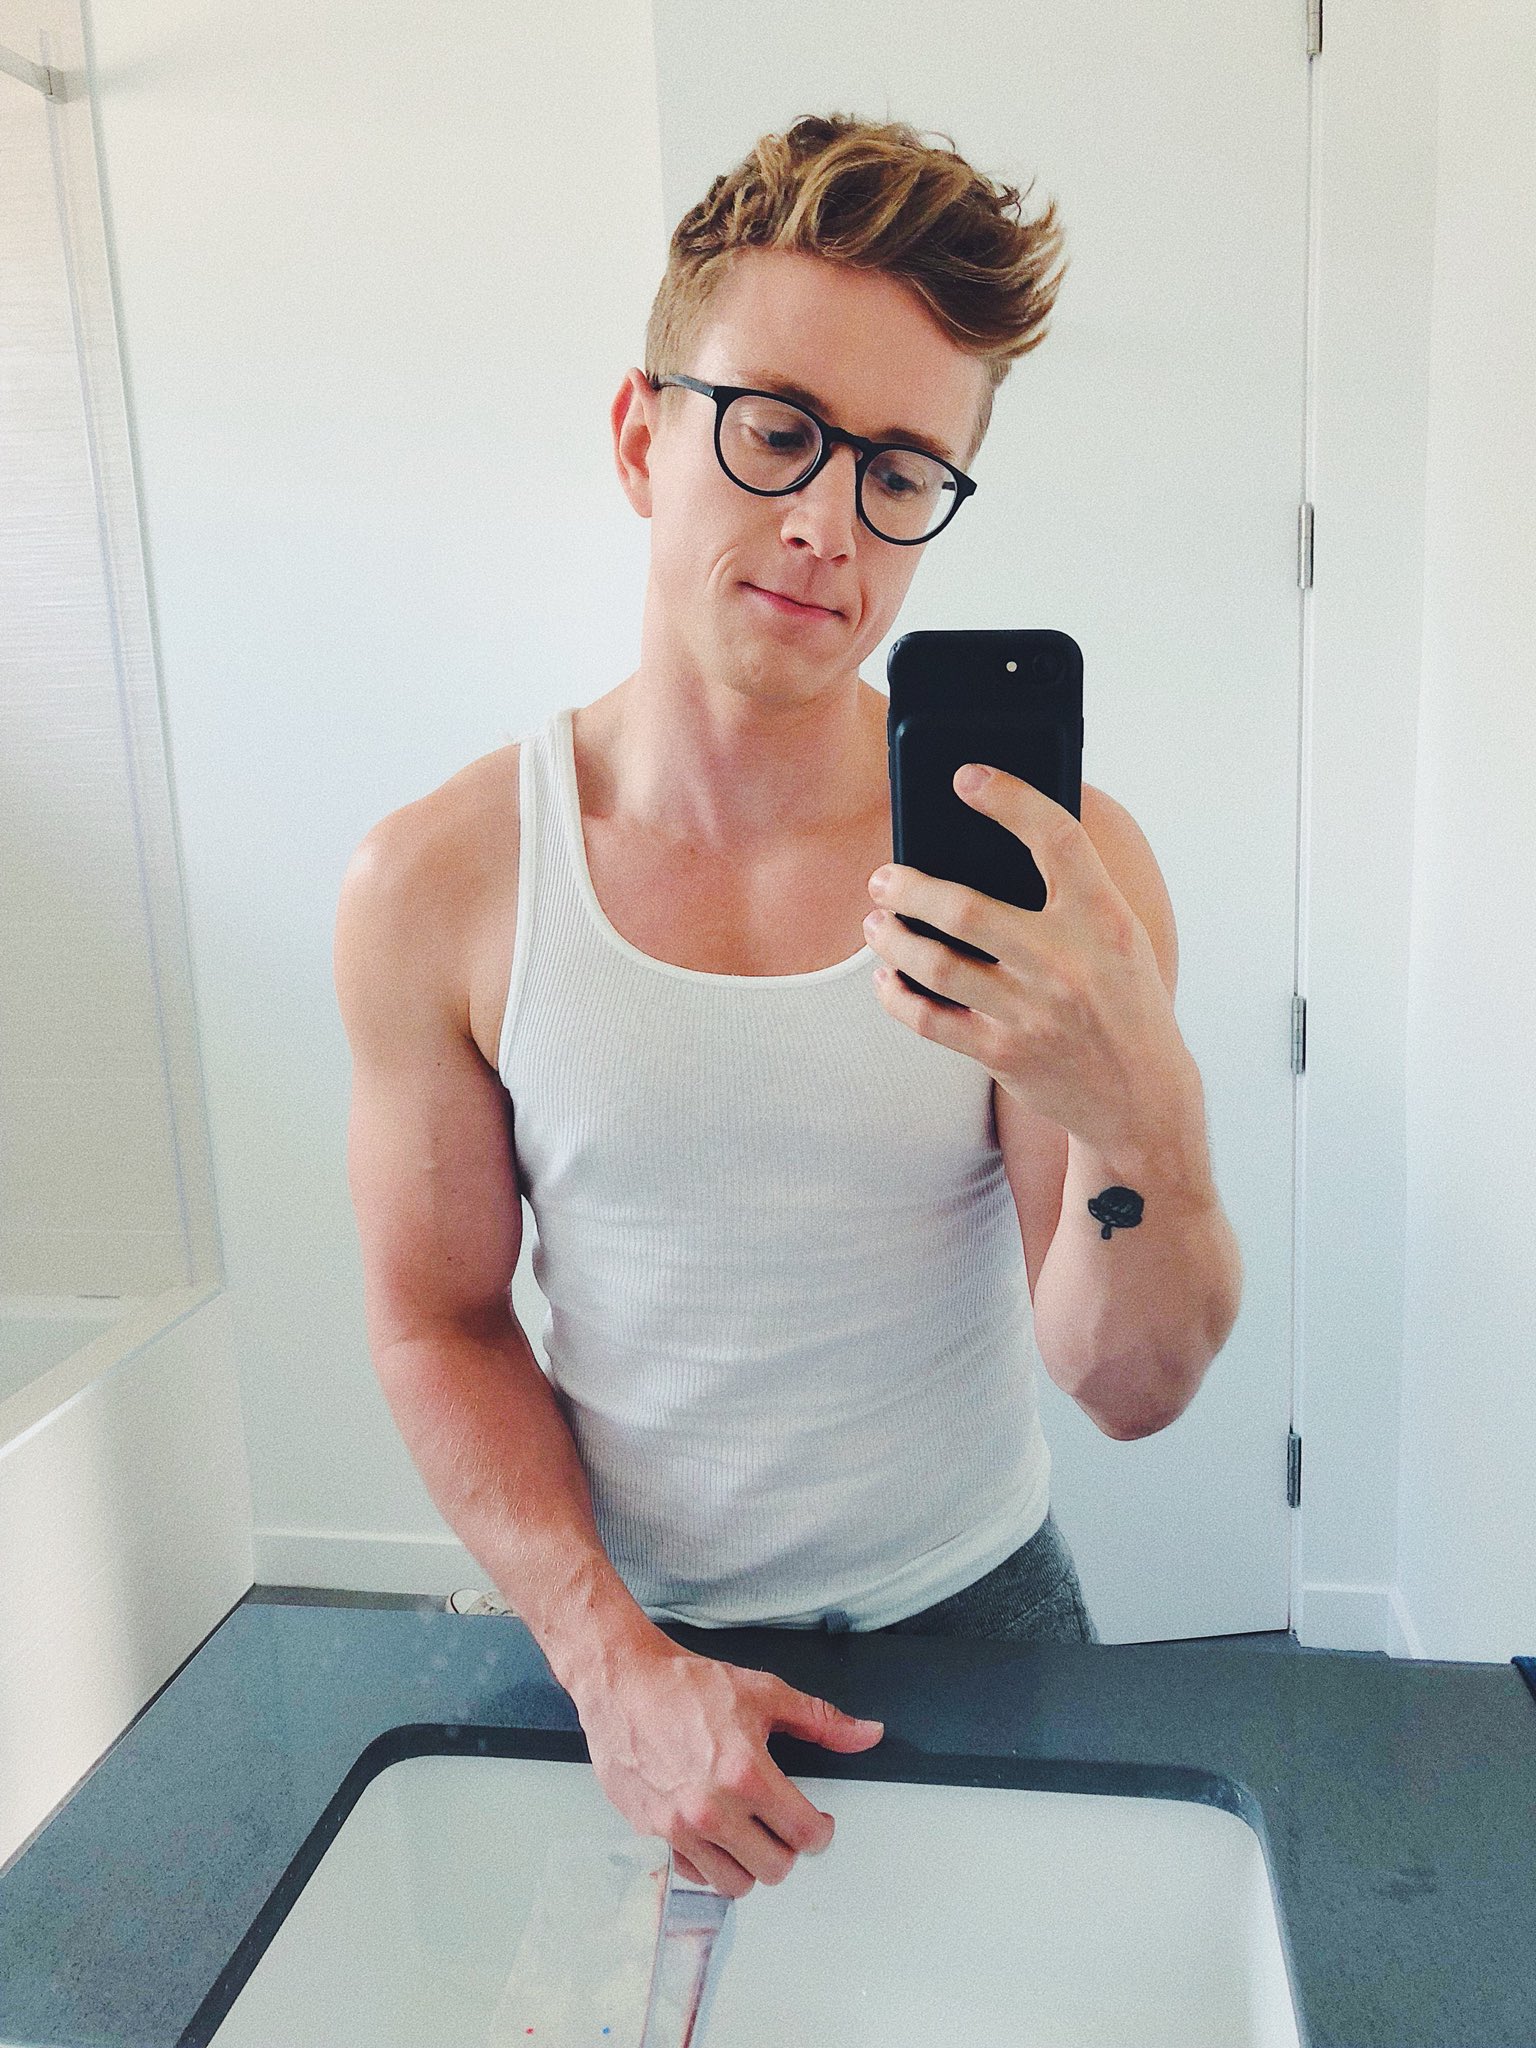 7 879. even electricity can't compare to what i feel. ⚡. @tyleroakley....